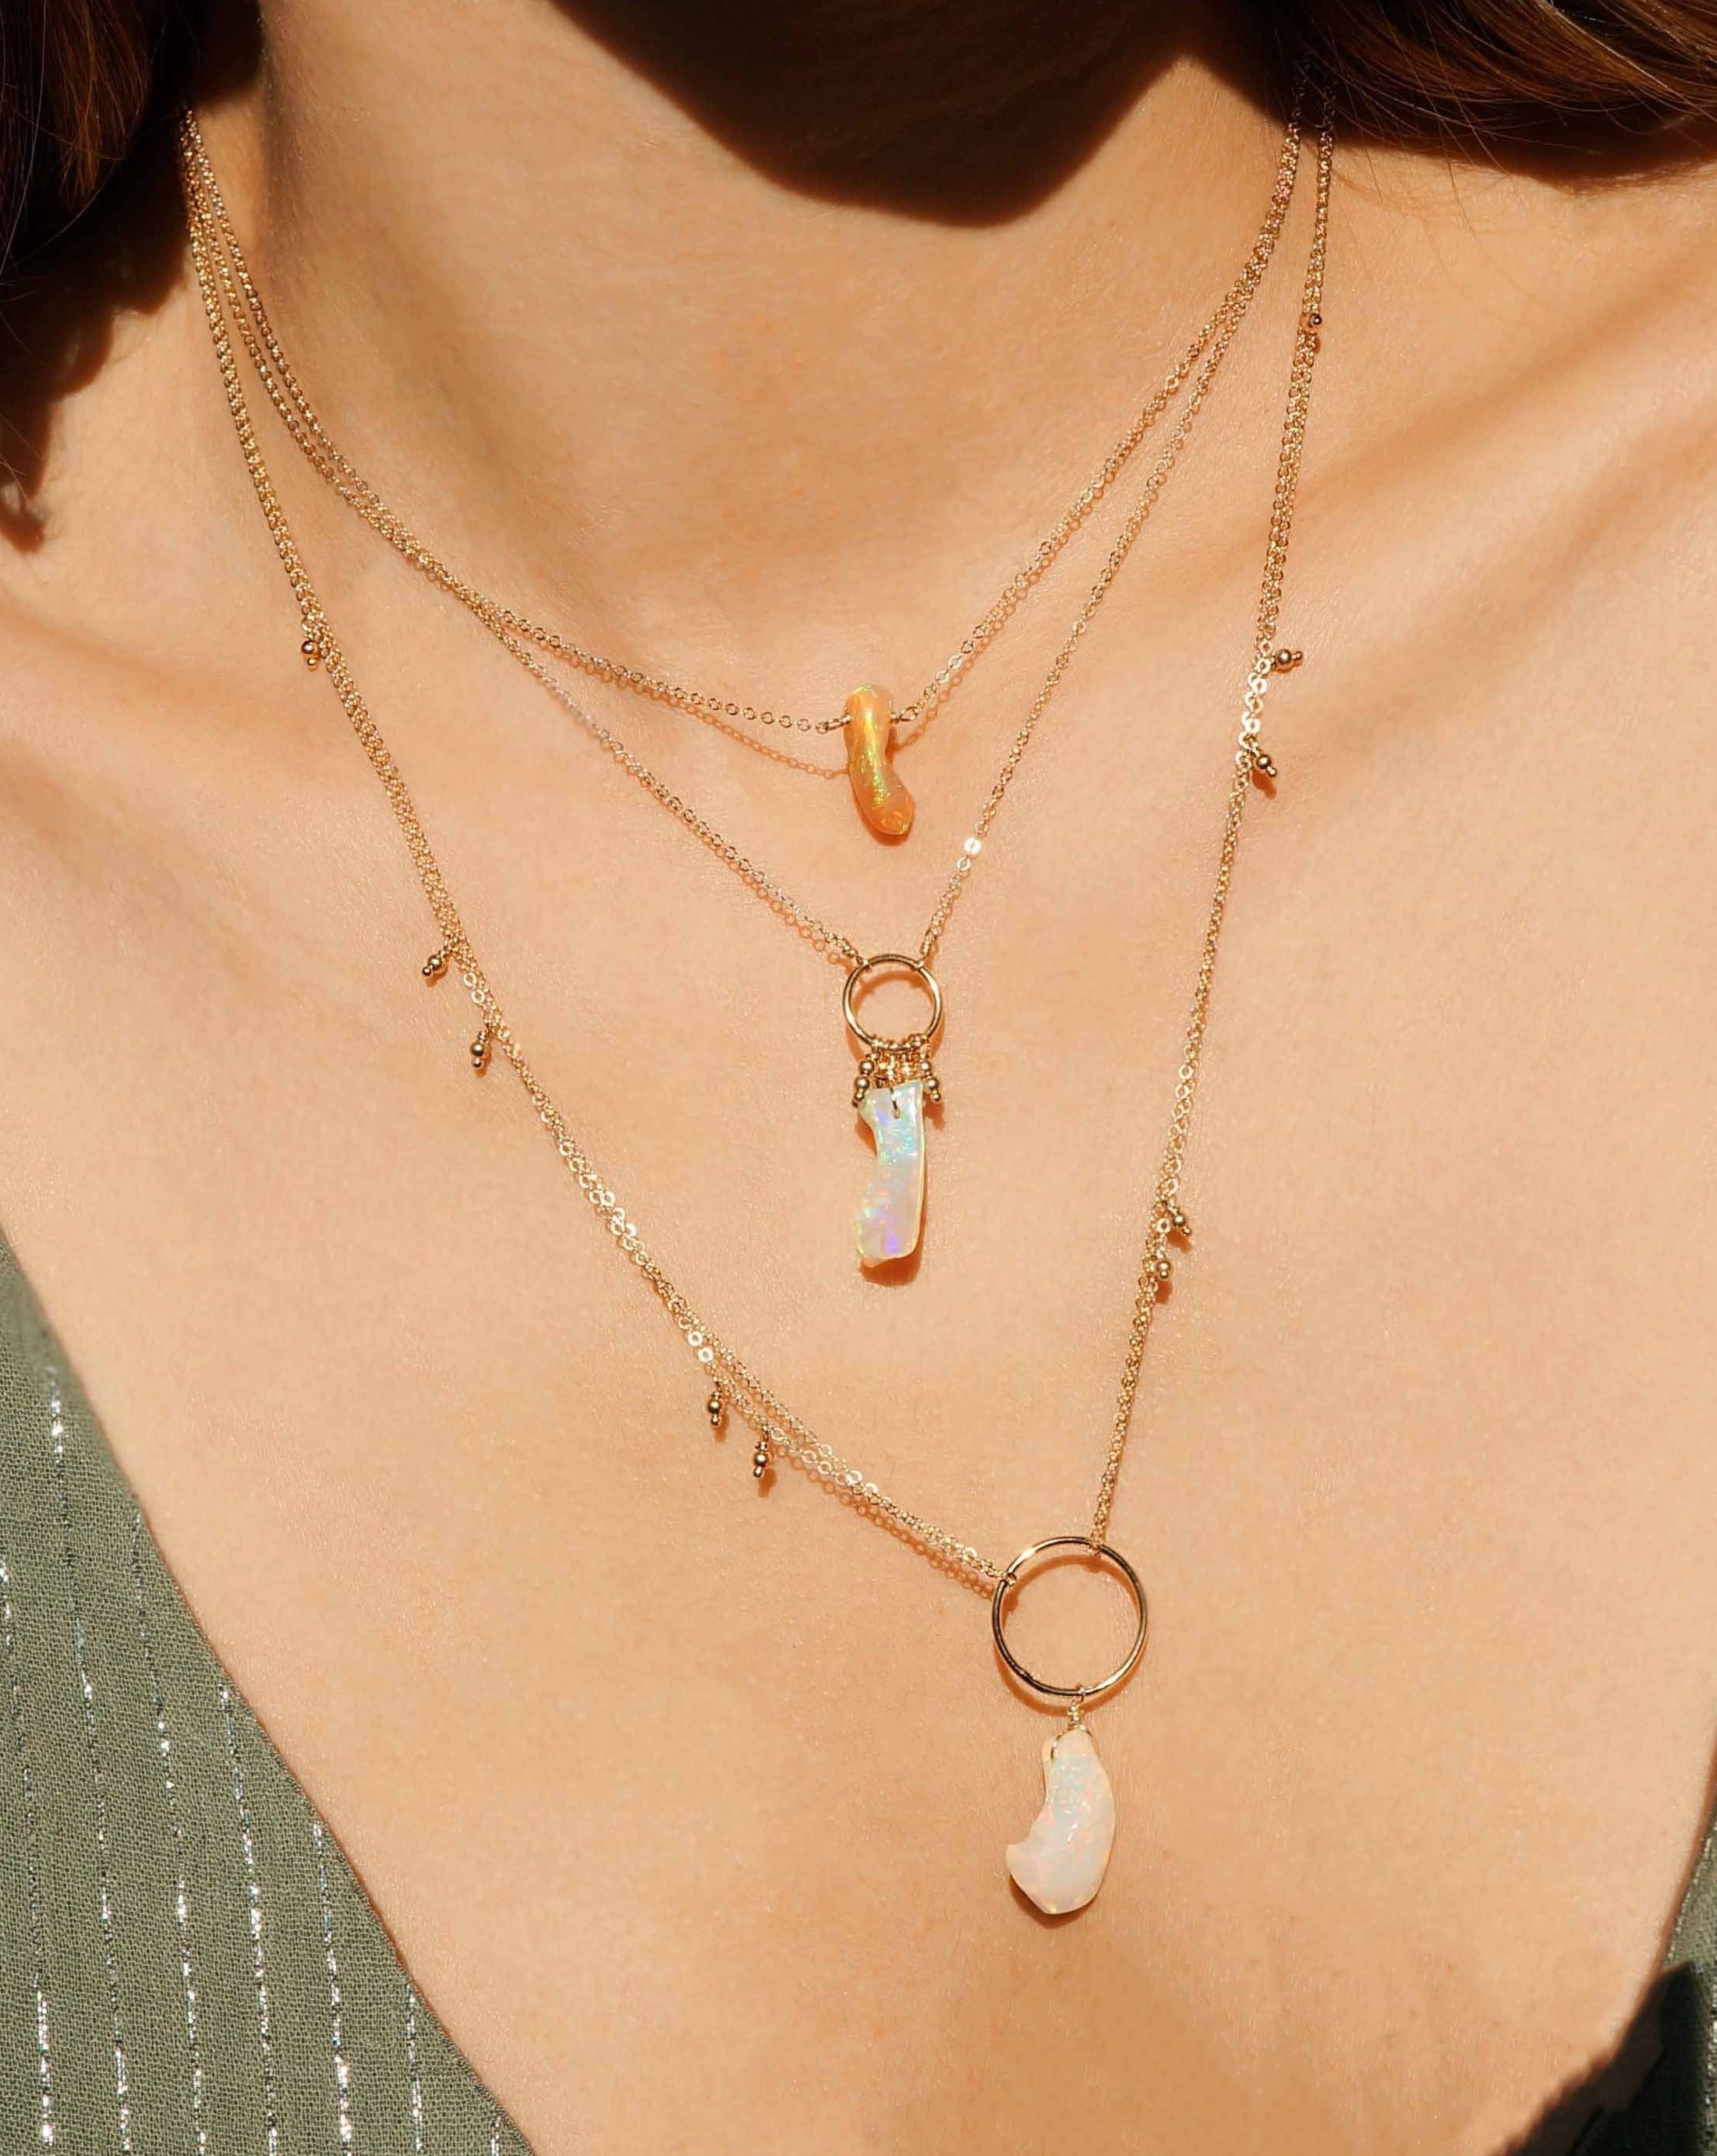 Lenta Necklace by KOZAKH. A 20 inches long necklace, crafted in 14K Gold Filled, featuring 2mm seamless beads and an irregular AAA+ Ethiopian Opal.